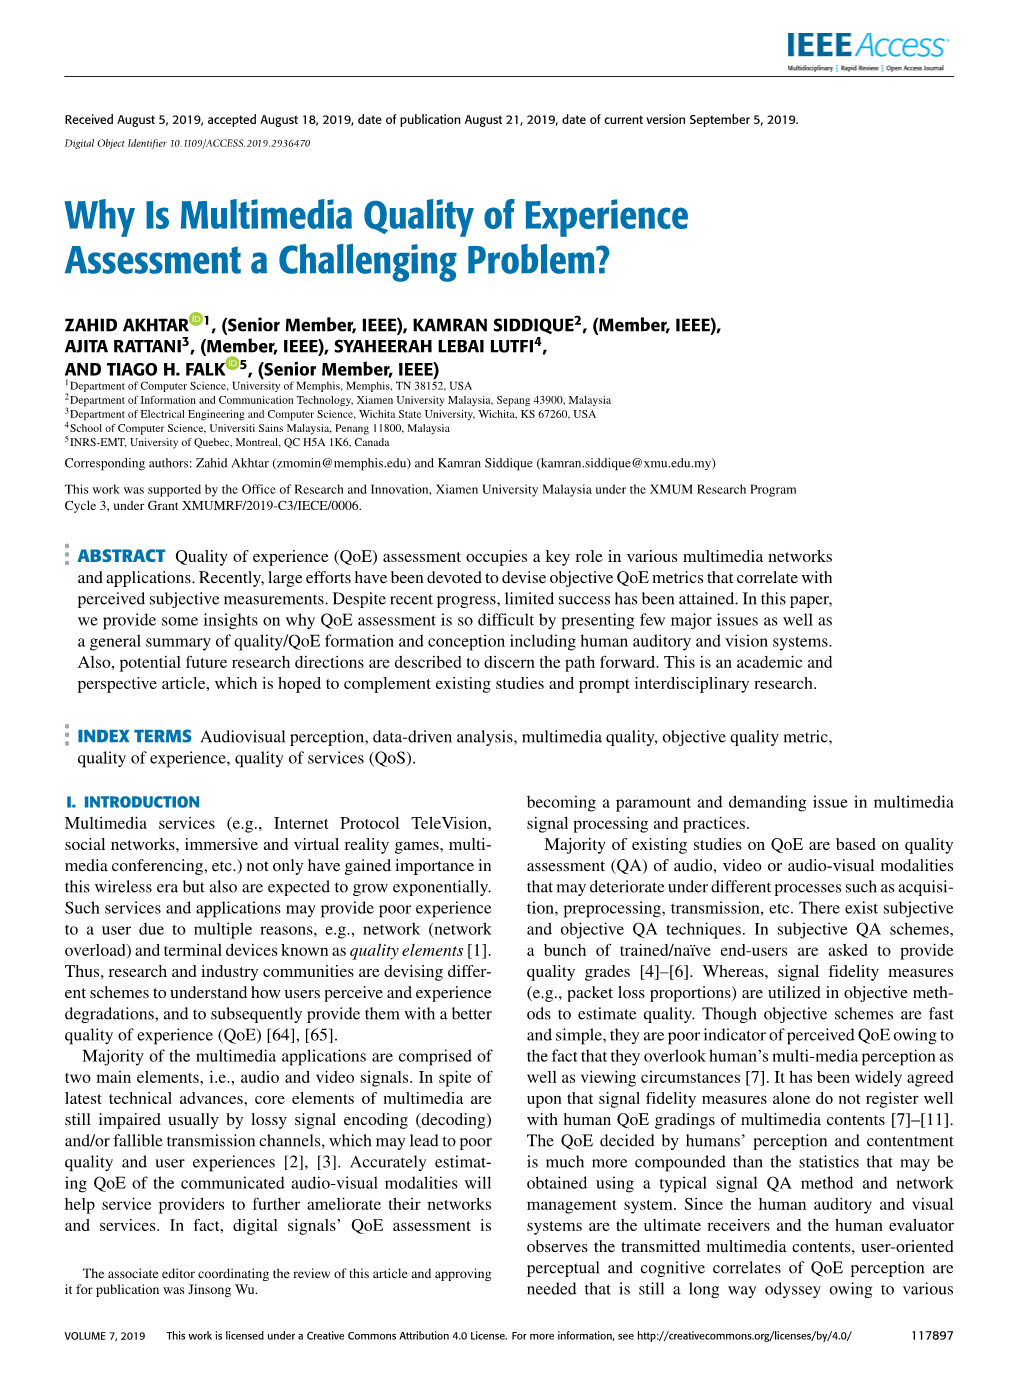 Why Is Multimedia Quality of Experience Assessment a Challenging Problem?